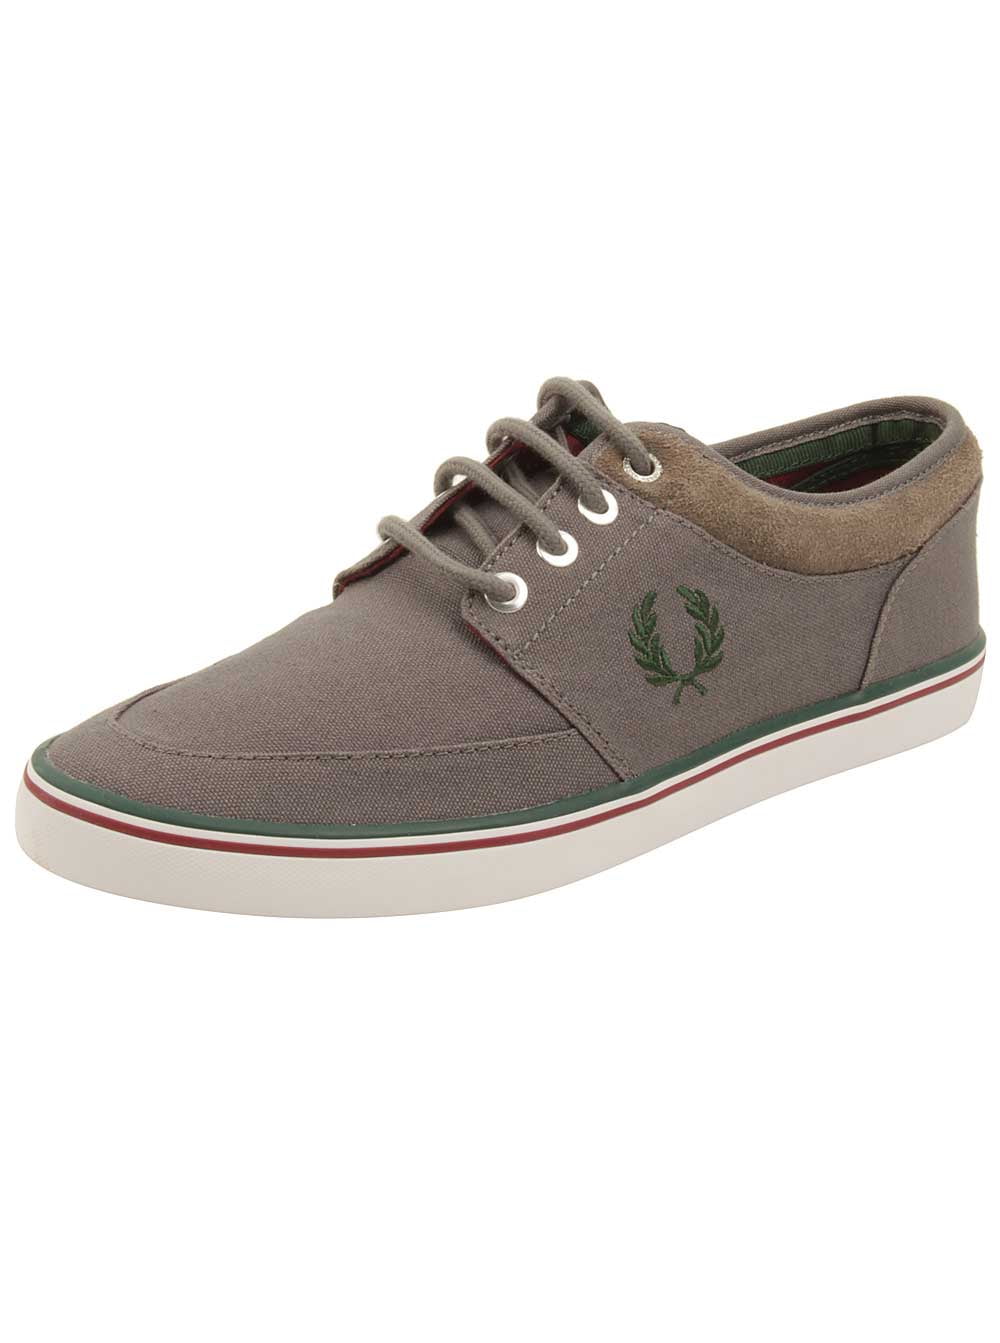 Fred Perry Mens Stratford Canvas Sneakers in Mid Grey - Walmart.com